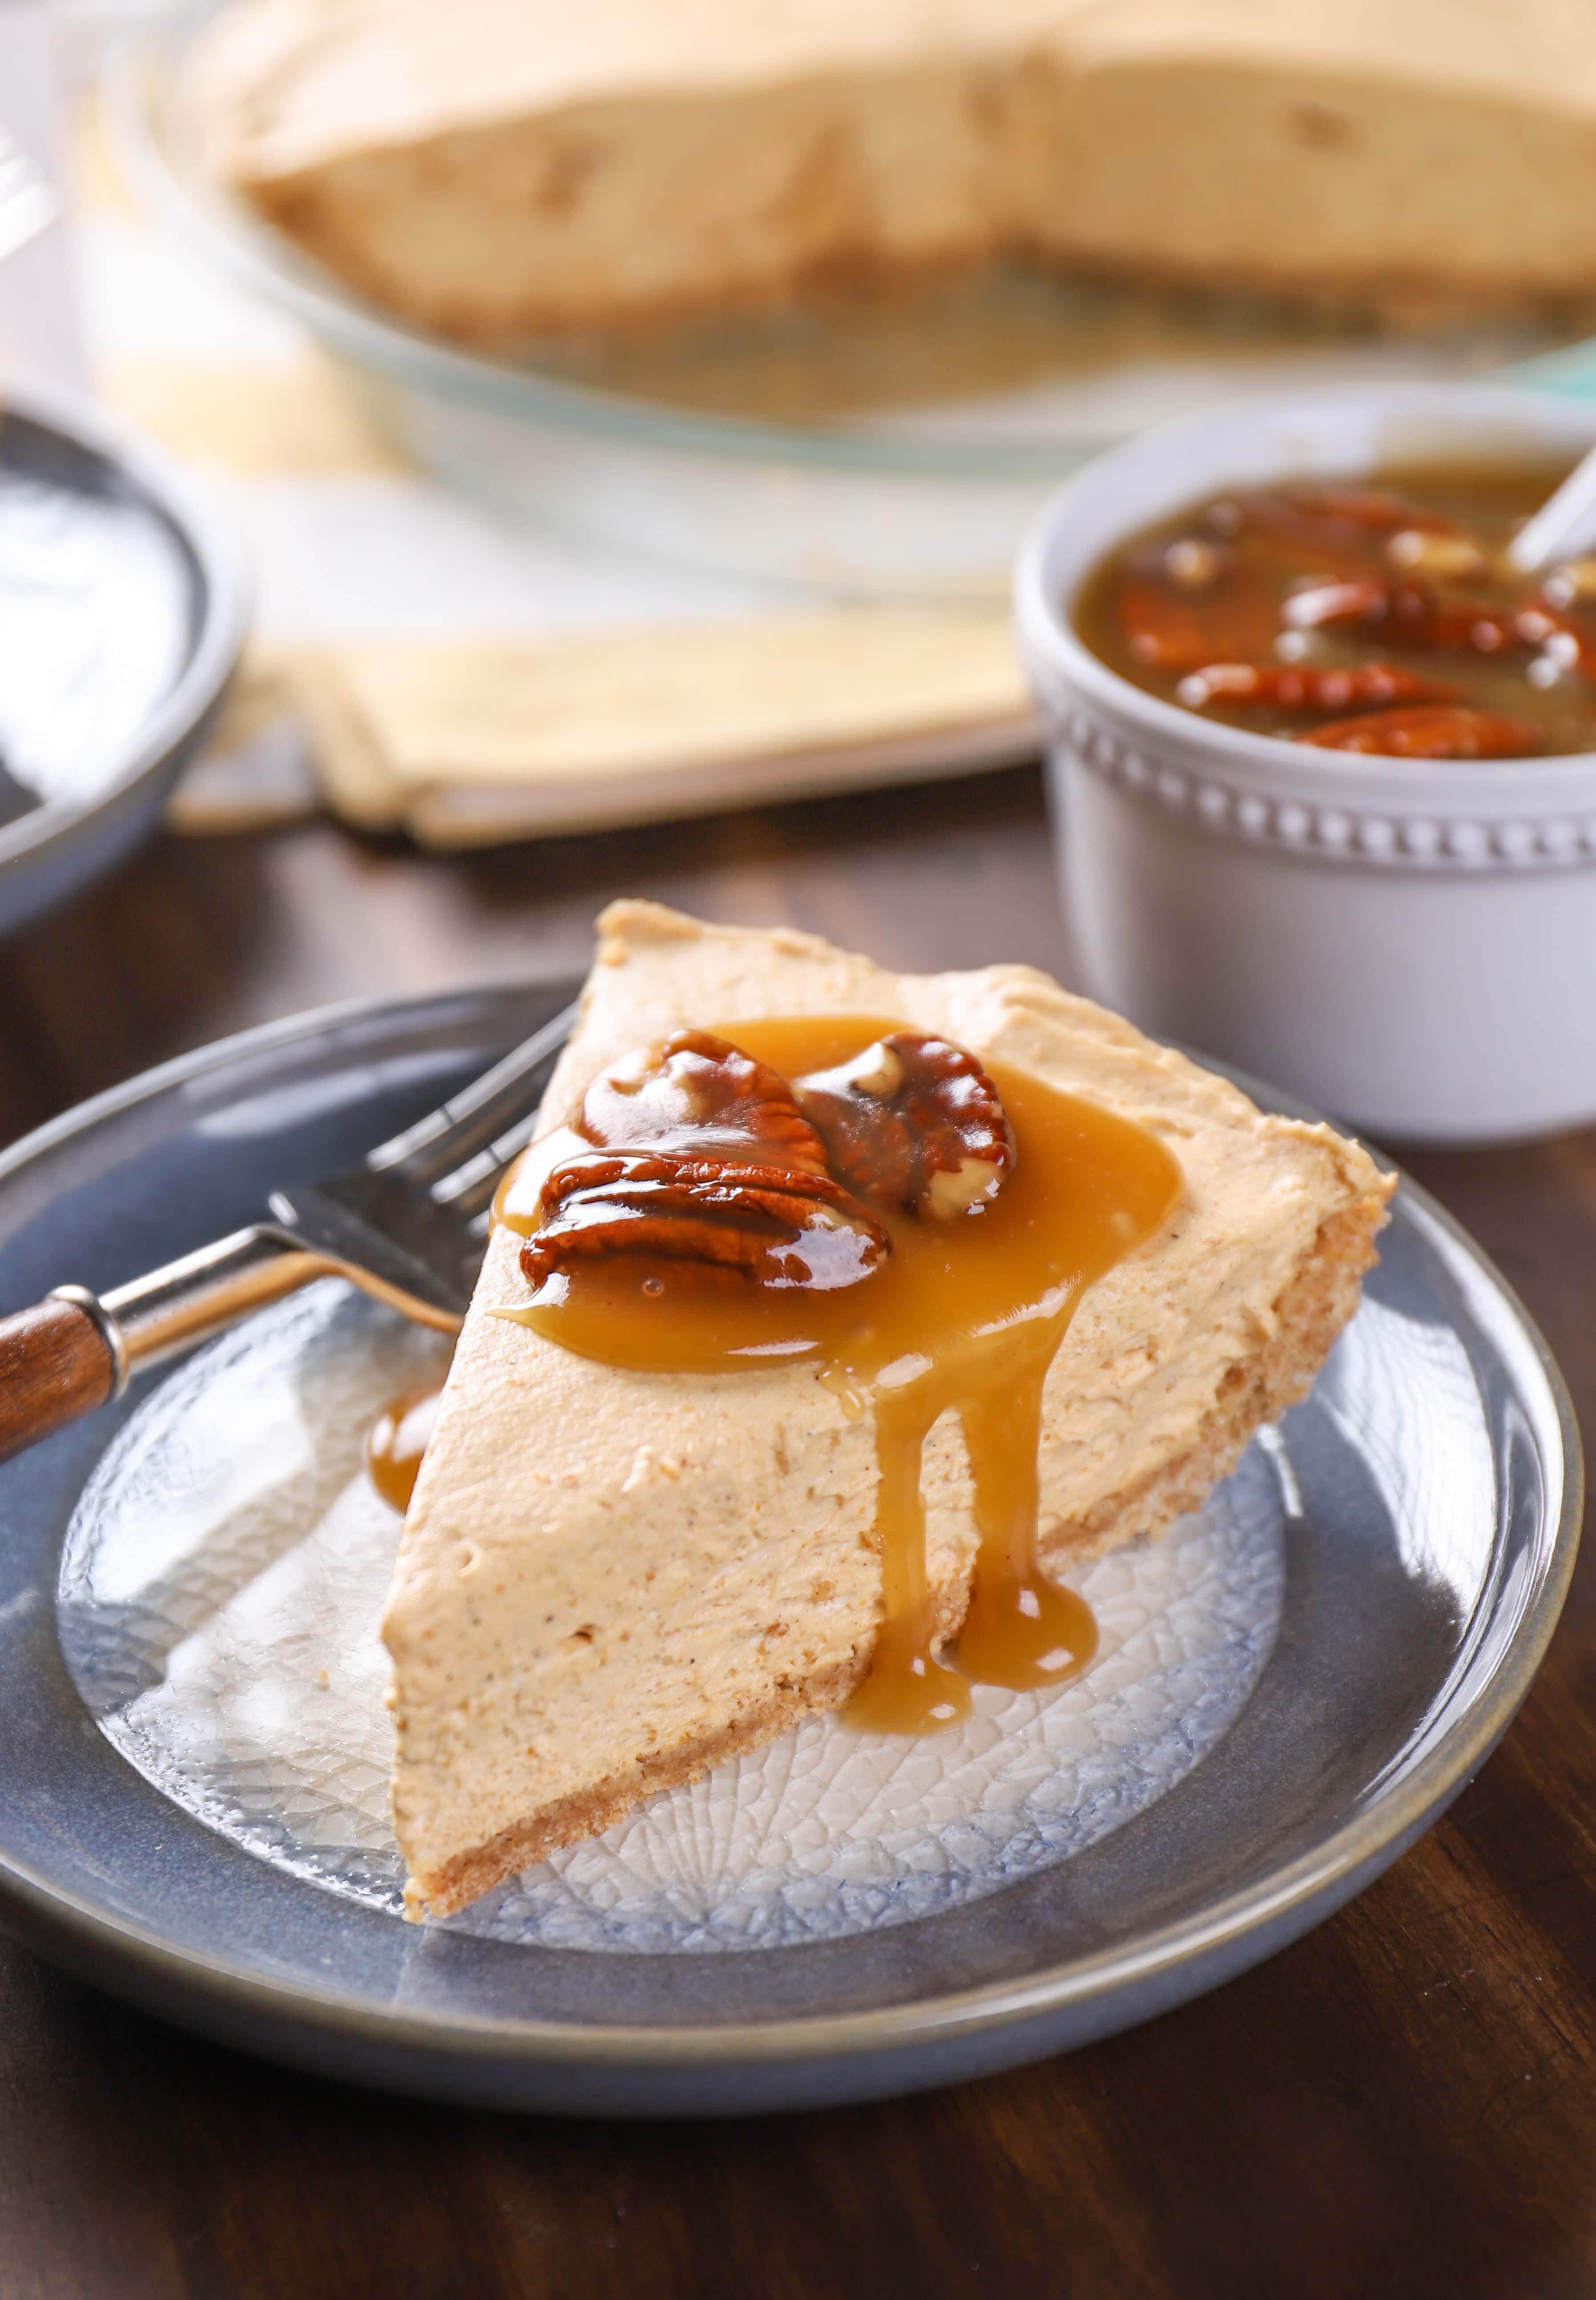 A quick and easy no bake cheesecake, this Maple Pumpkin Cheesecake with Pec...